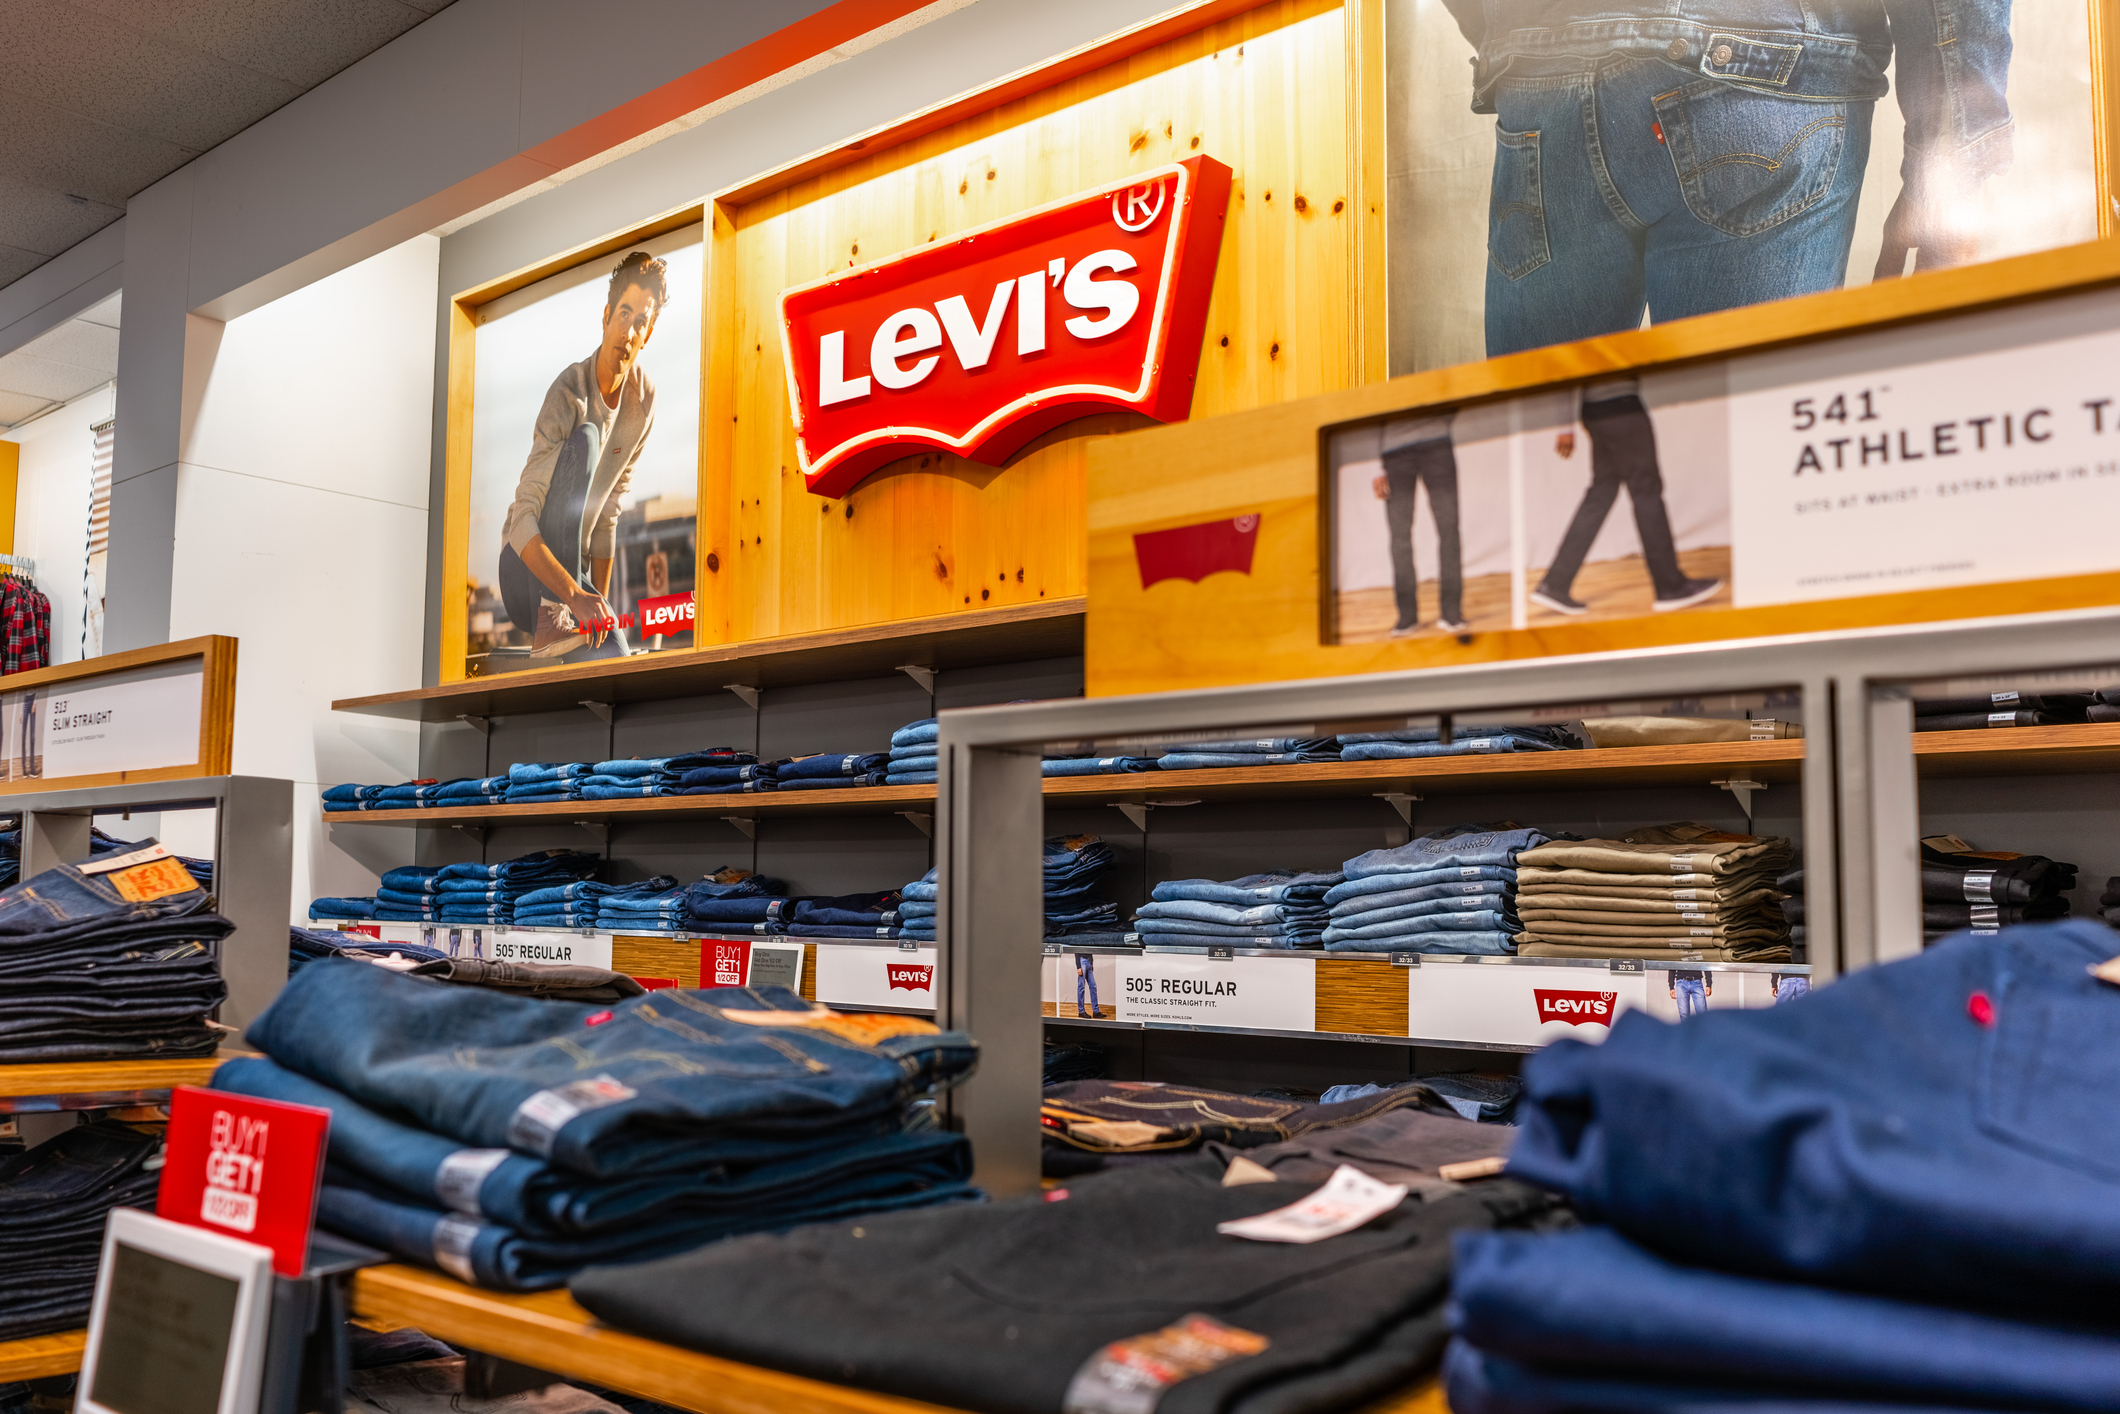 Levi's Warehouse Sale: Save up to 75% on select items - Clark Deals